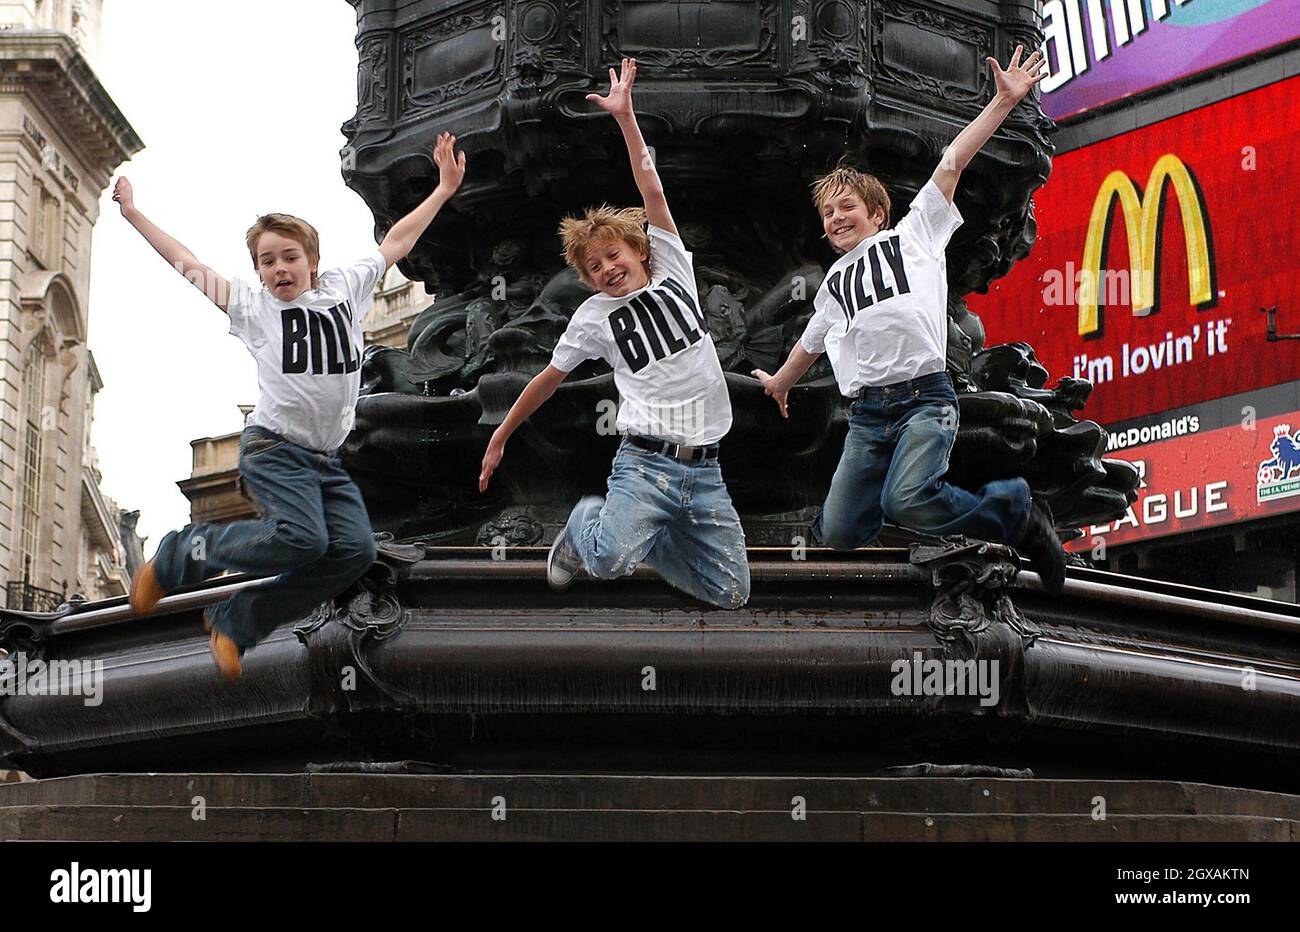 Stephen Daldry, director, introduces the three young actors, picked from over 3000 hopefuls to play title role in the musical of Billy Elliott.  The boys from the left are Liam Mower, 12 years old, George Maguire, 13 years old and James Lomas, 14 years old.   Stock Photo